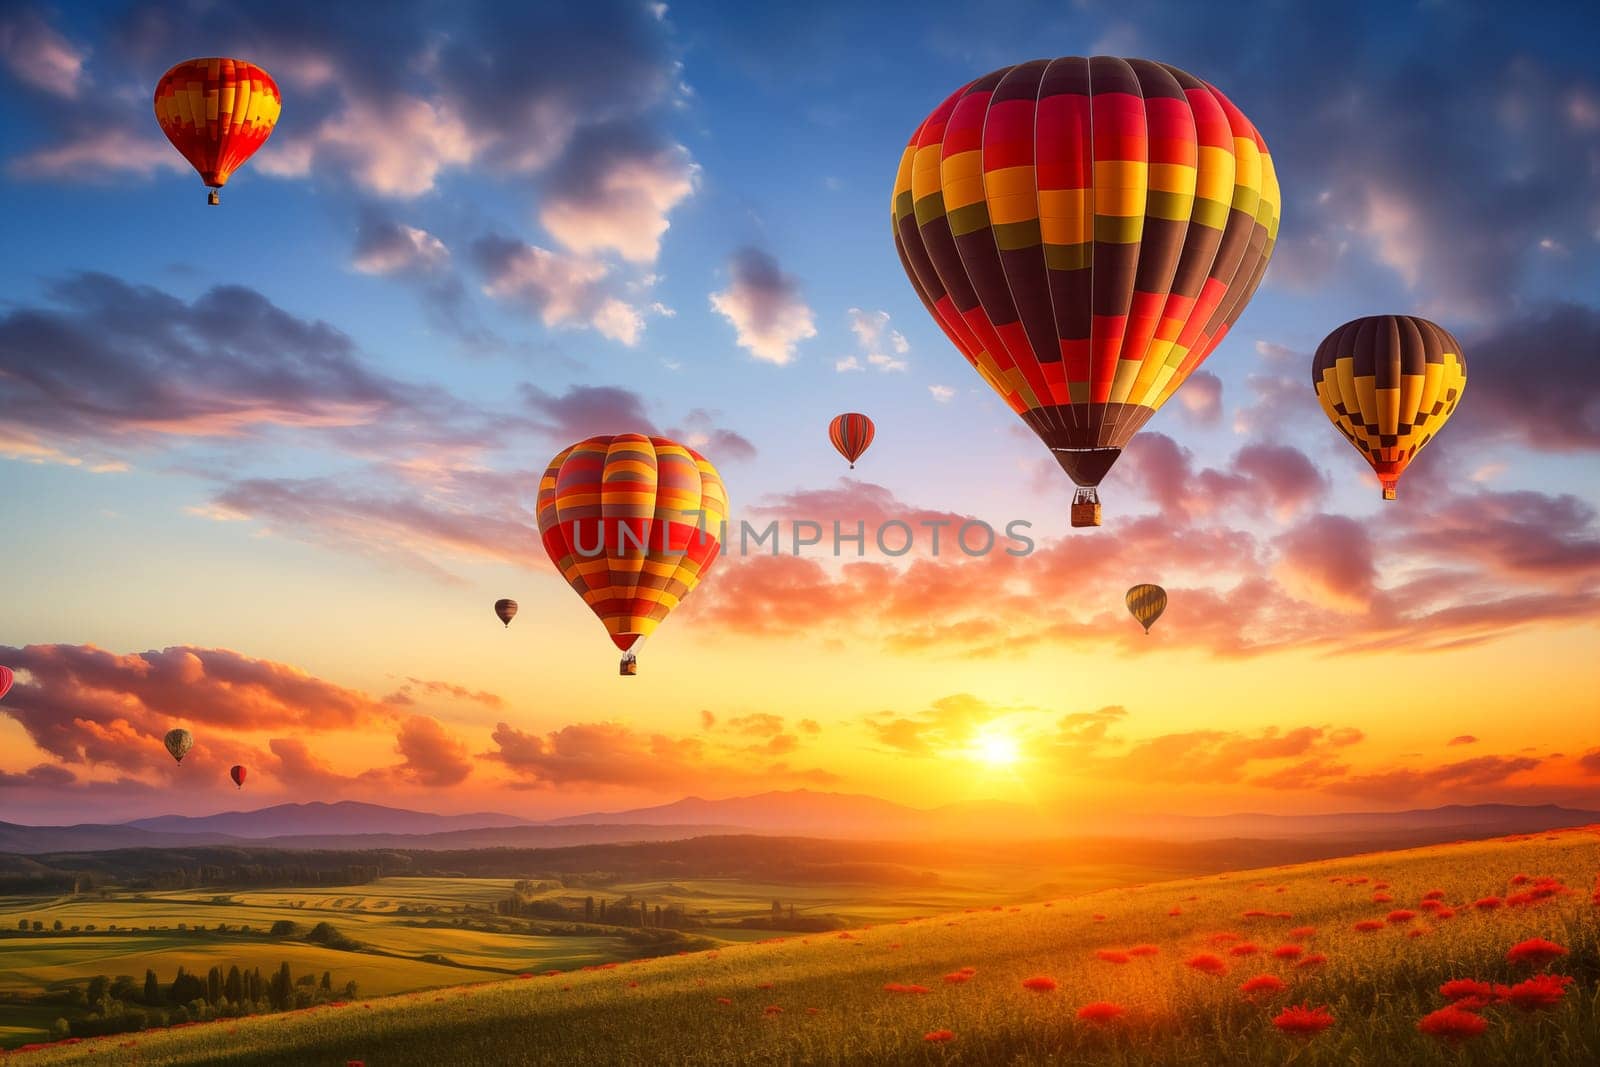 A colorful hot air balloons floats in sky over a blooming field meadow of flowers landscape at sunset with orange and blue skies in the background. Travel journey adventure beauty of nature concept